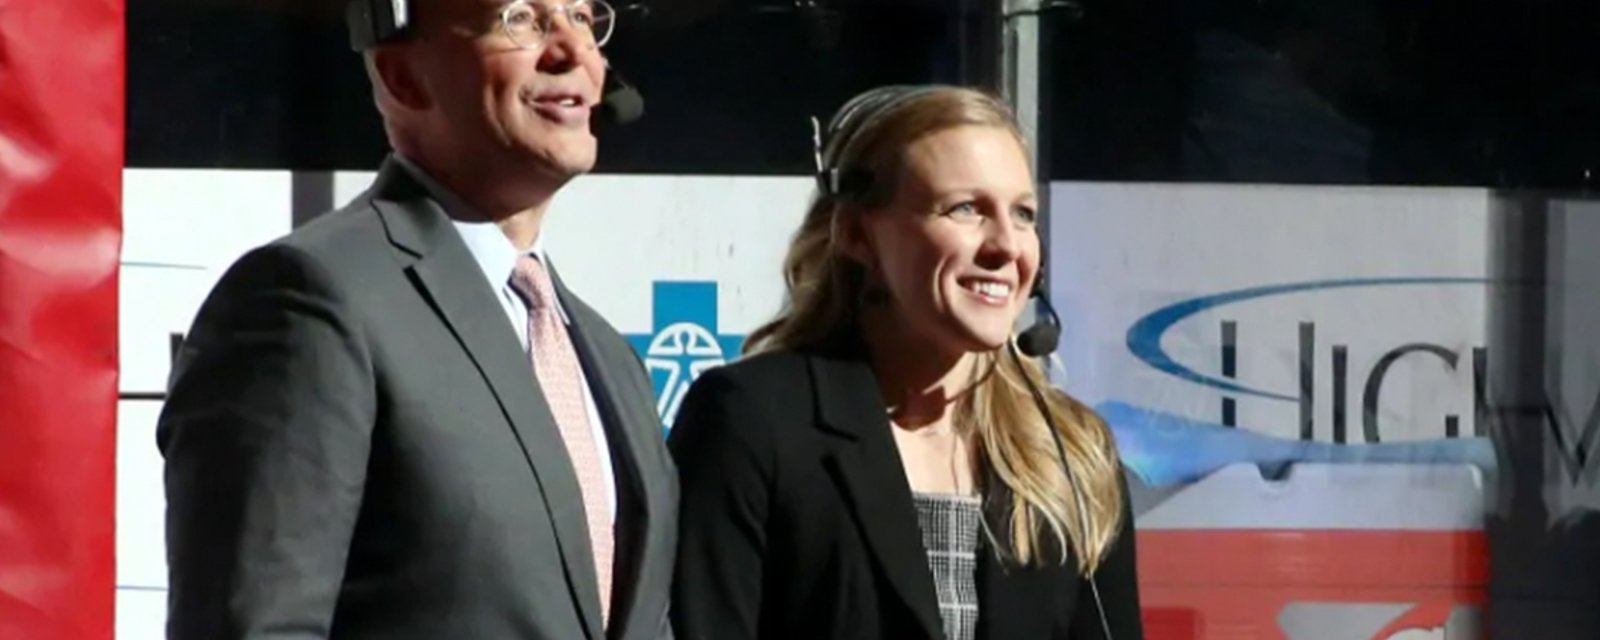 Kendall Coyne responds to criticism of NBC analyst Pierre McGuire after “mansplaining” accusations